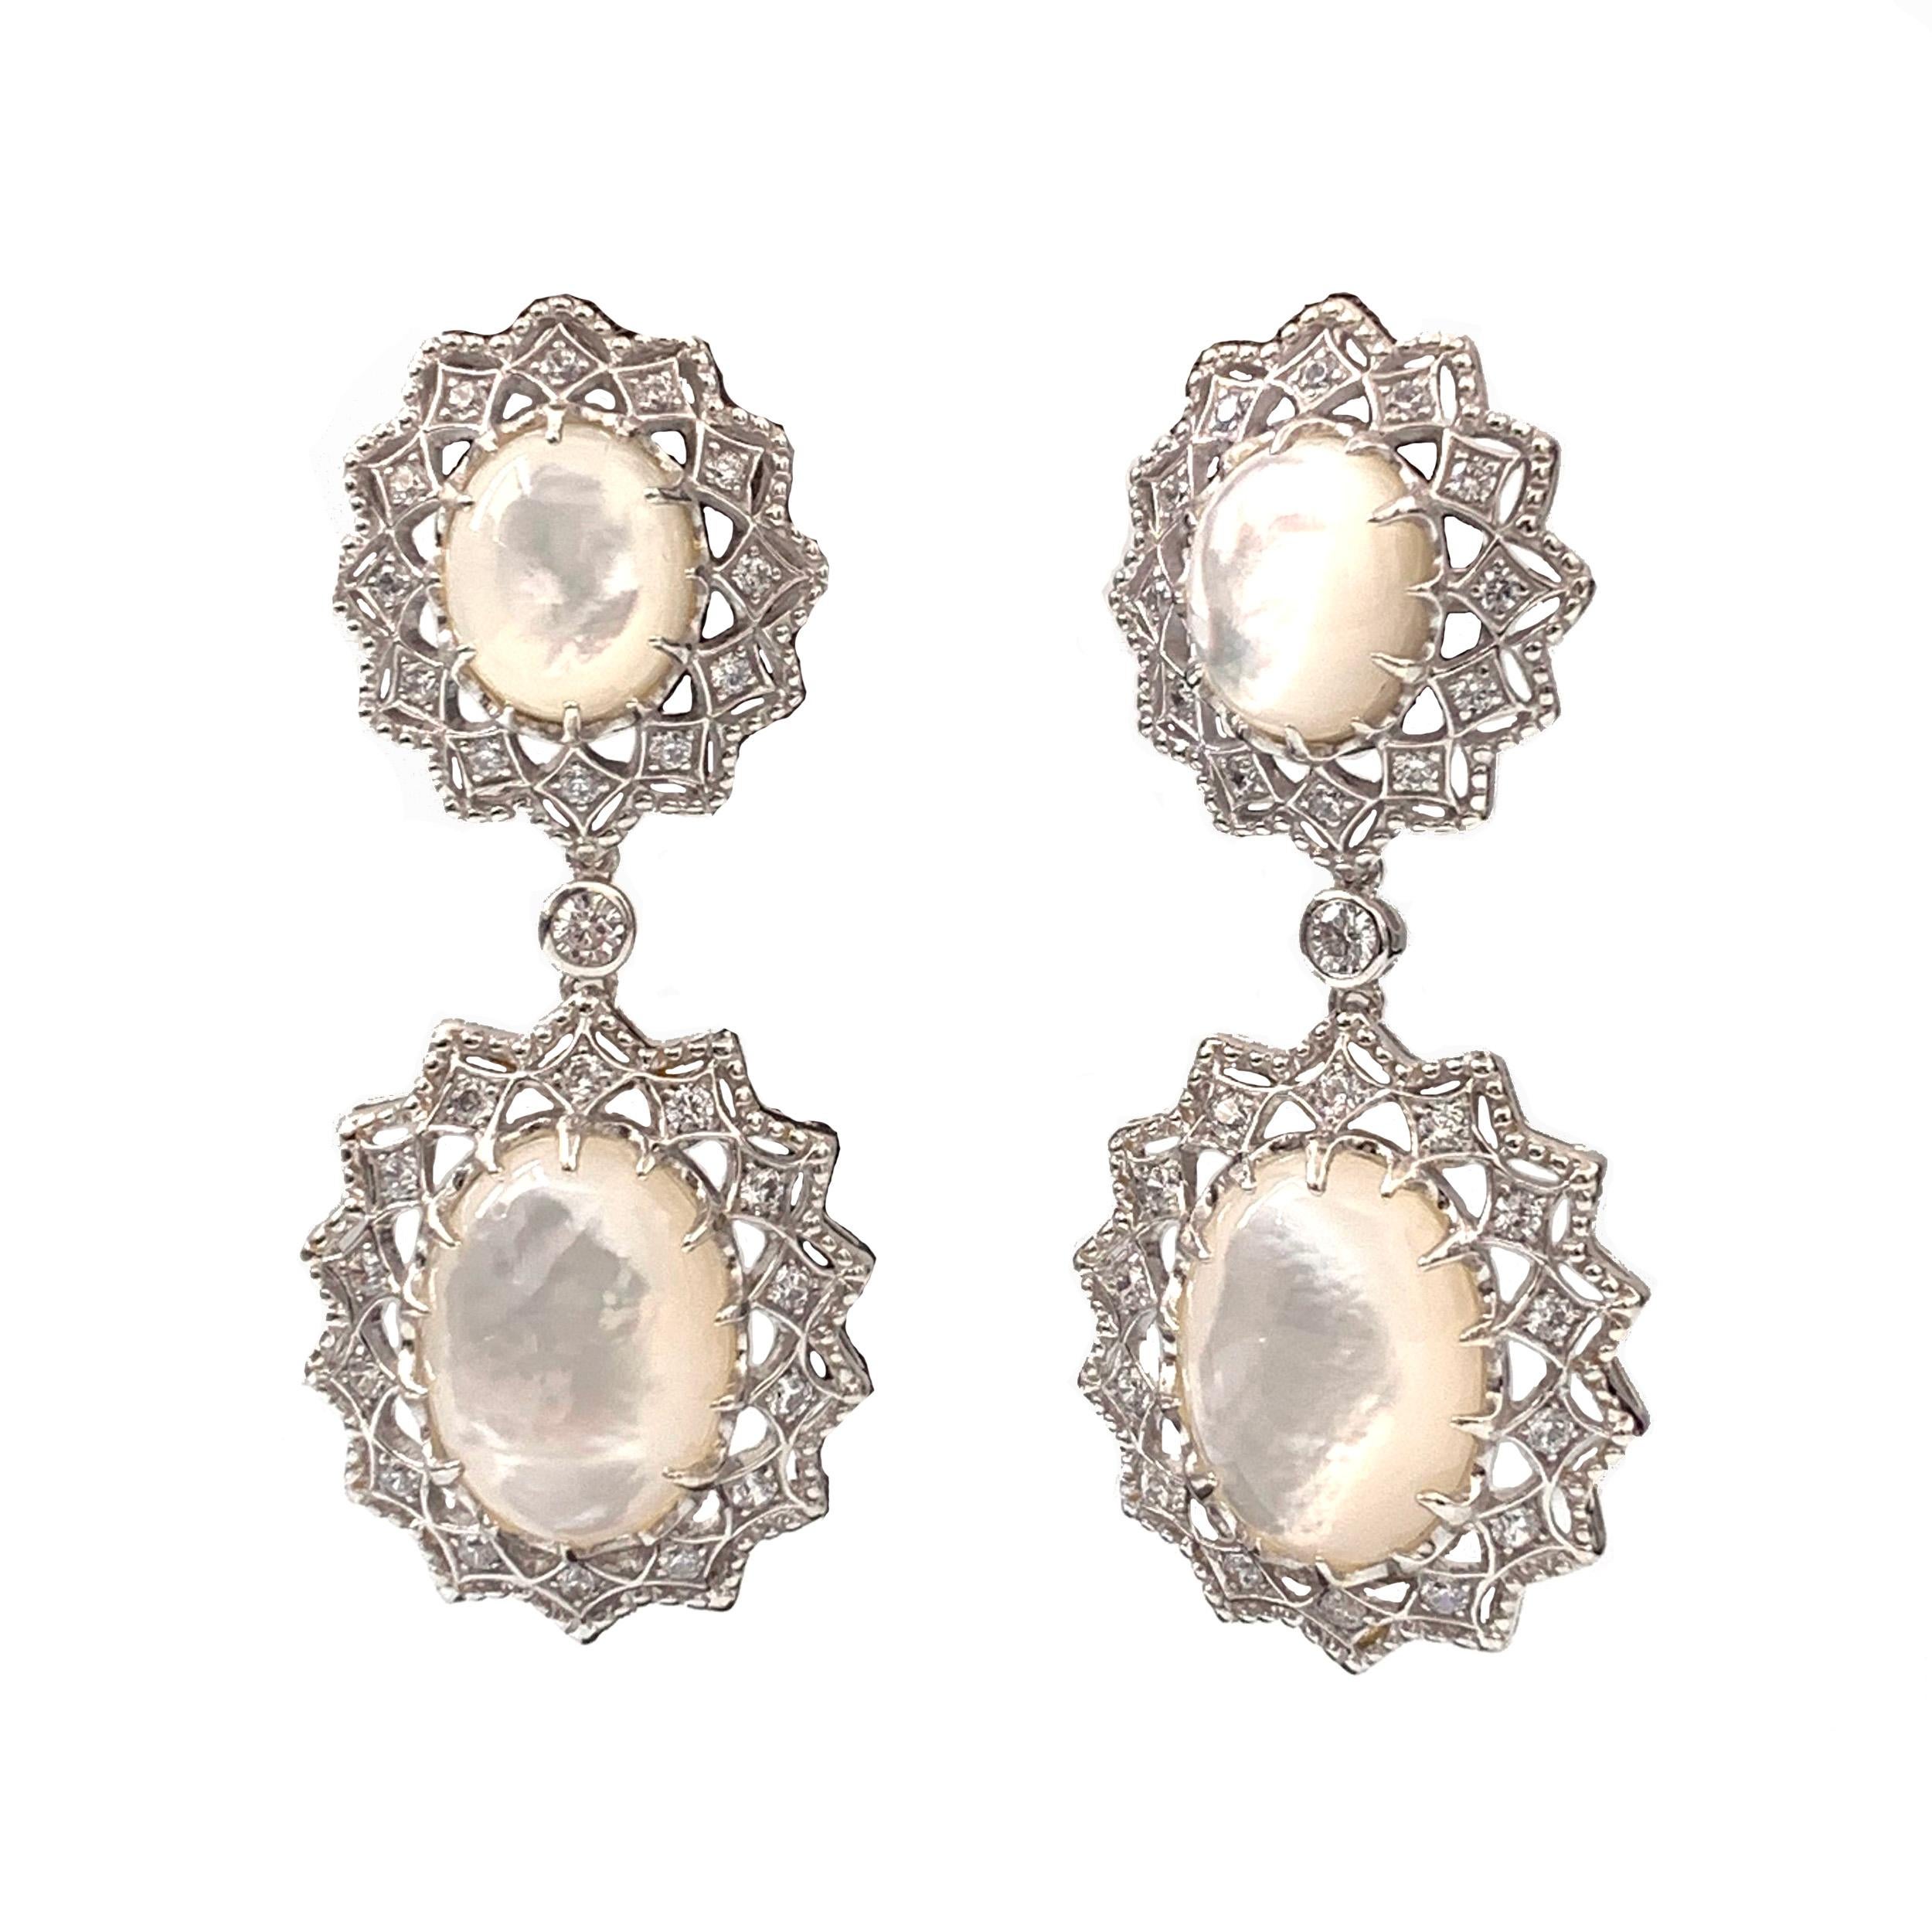 Beautiful laced drop earrings featuring oval mother of pearls, round cubic zirconias, and silver bead edging handset in platinum rhodium plated sterling silver. Top part has diameter of 0.75